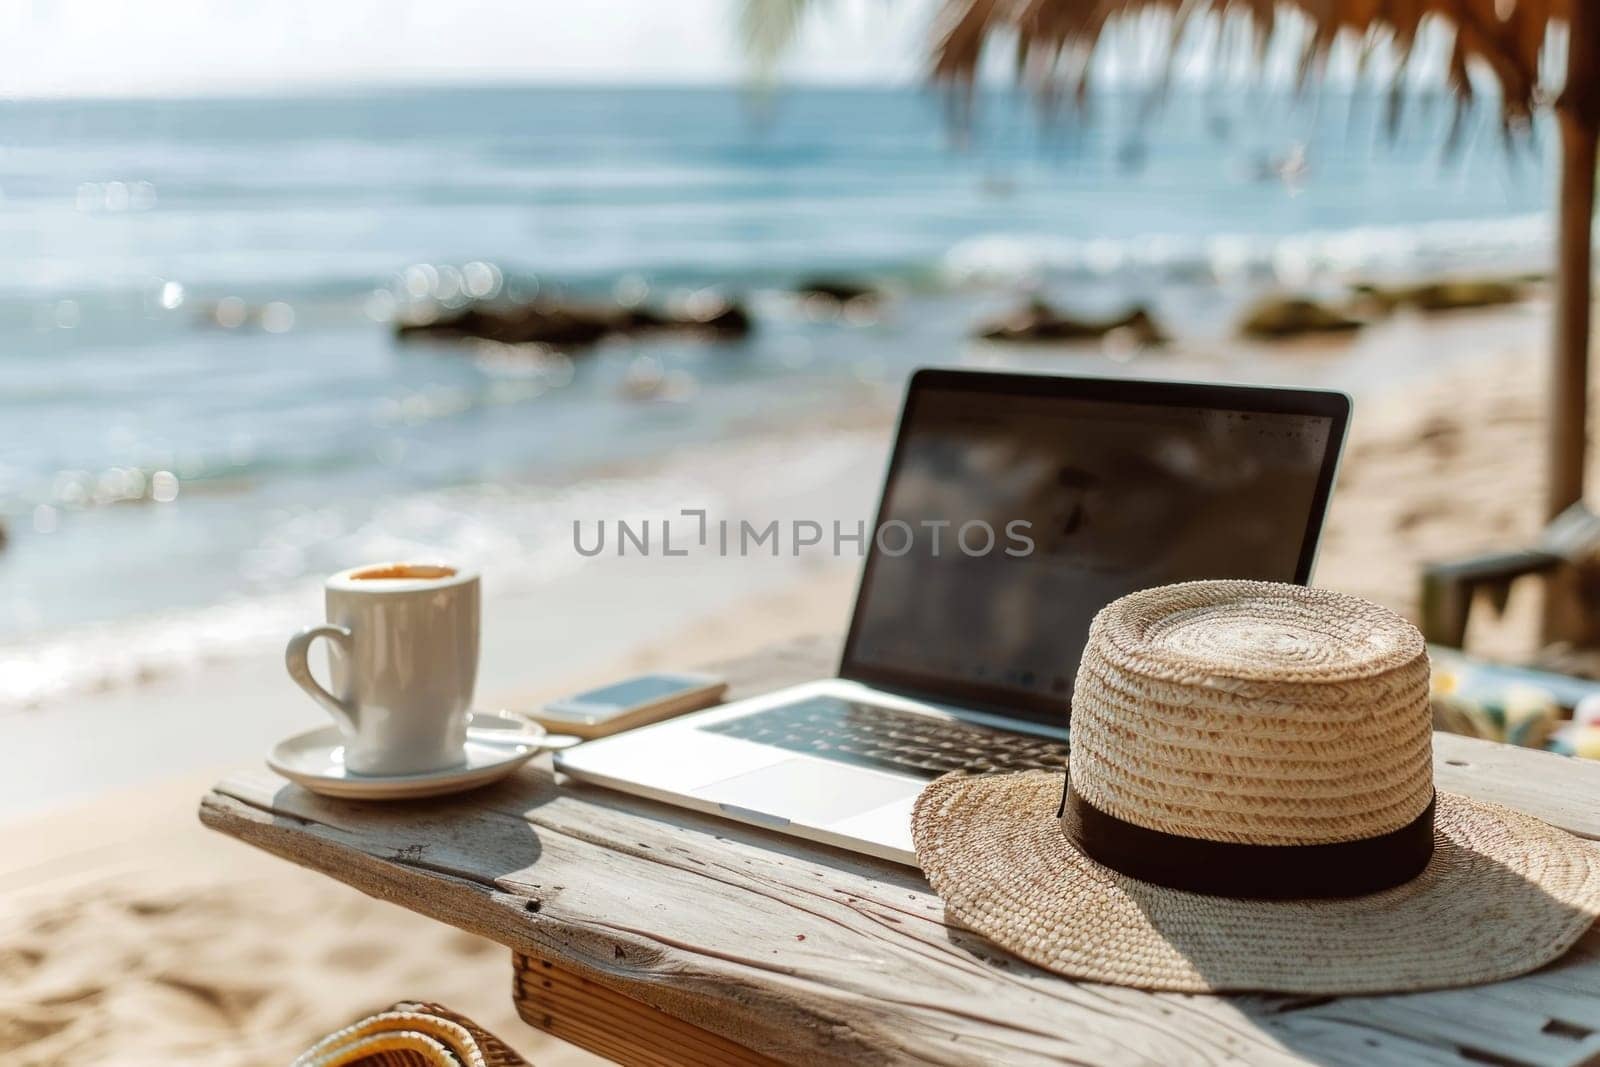 A laptop is open on a table next to a straw hat and a cup.